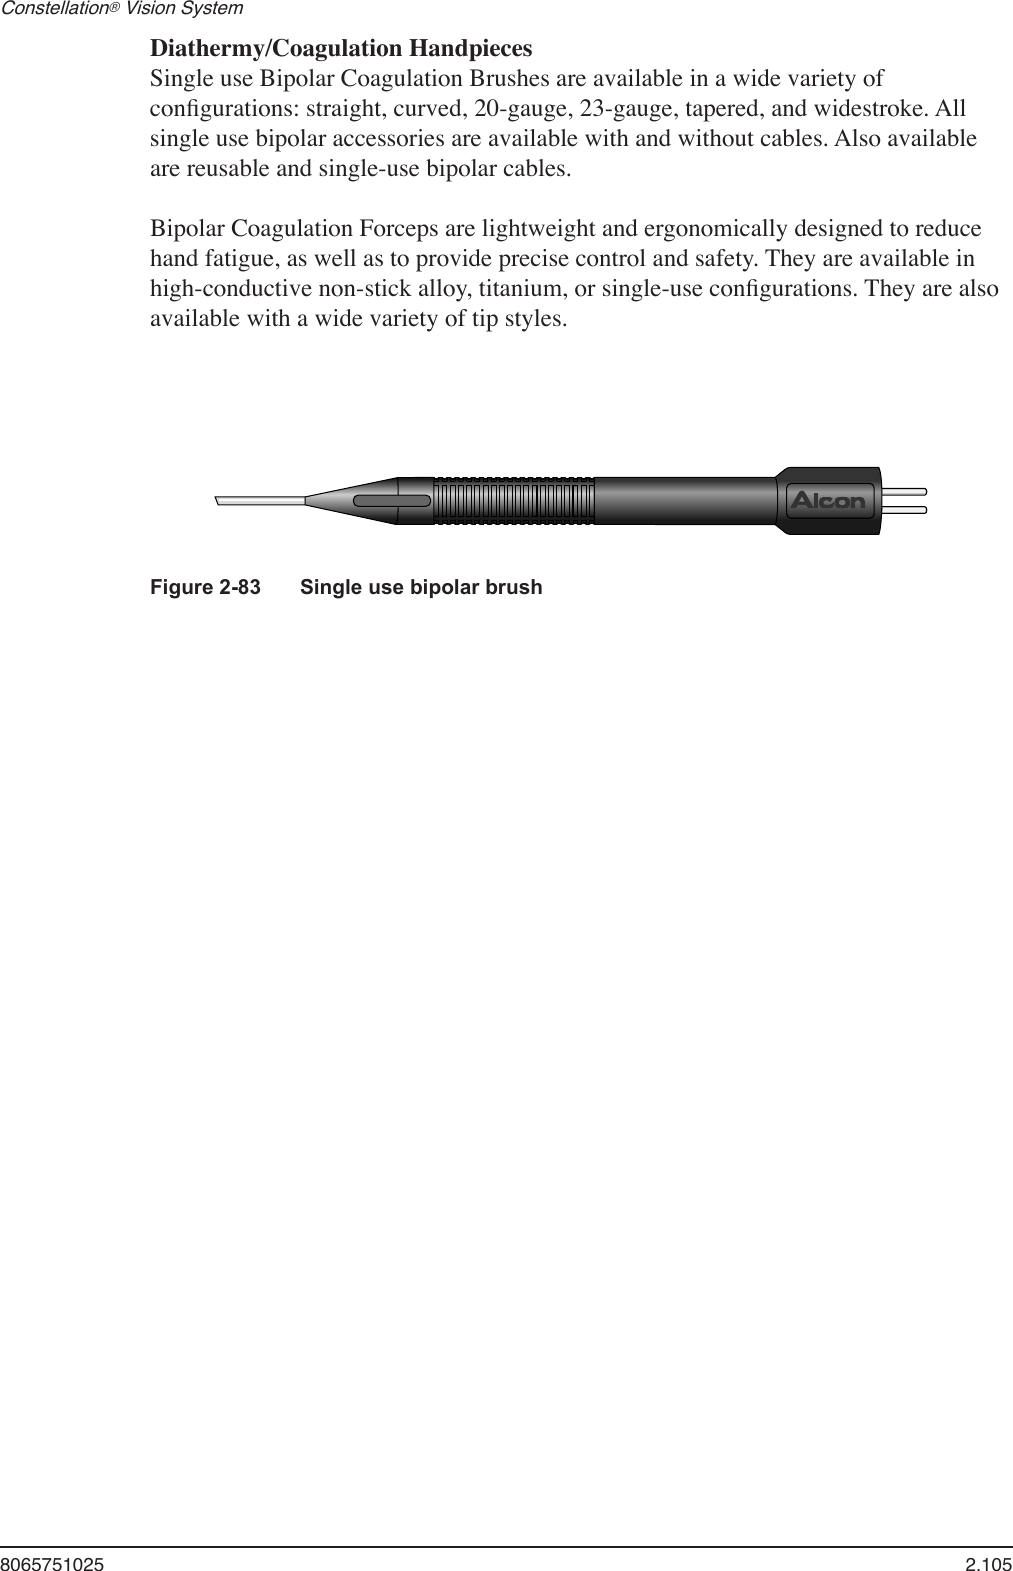 8065751025  2.105Constellation® Vision System   Diathermy/Coagulation Handpieces  Single use Bipolar Coagulation Brushes are available in a wide variety of conﬁgurations: straight, curved, 20-gauge, 23-gauge, tapered, and widestroke. All single use bipolar accessories are available with and without cables. Also available are reusable and single-use bipolar cables.  Bipolar Coagulation Forceps are lightweight and ergonomically designed to reduce hand fatigue, as well as to provide precise control and safety. They are available in high-conductive non-stick alloy, titanium, or single-use conﬁgurations. They are also available with a wide variety of tip styles.Figure 2-83  Single use bipolar brush